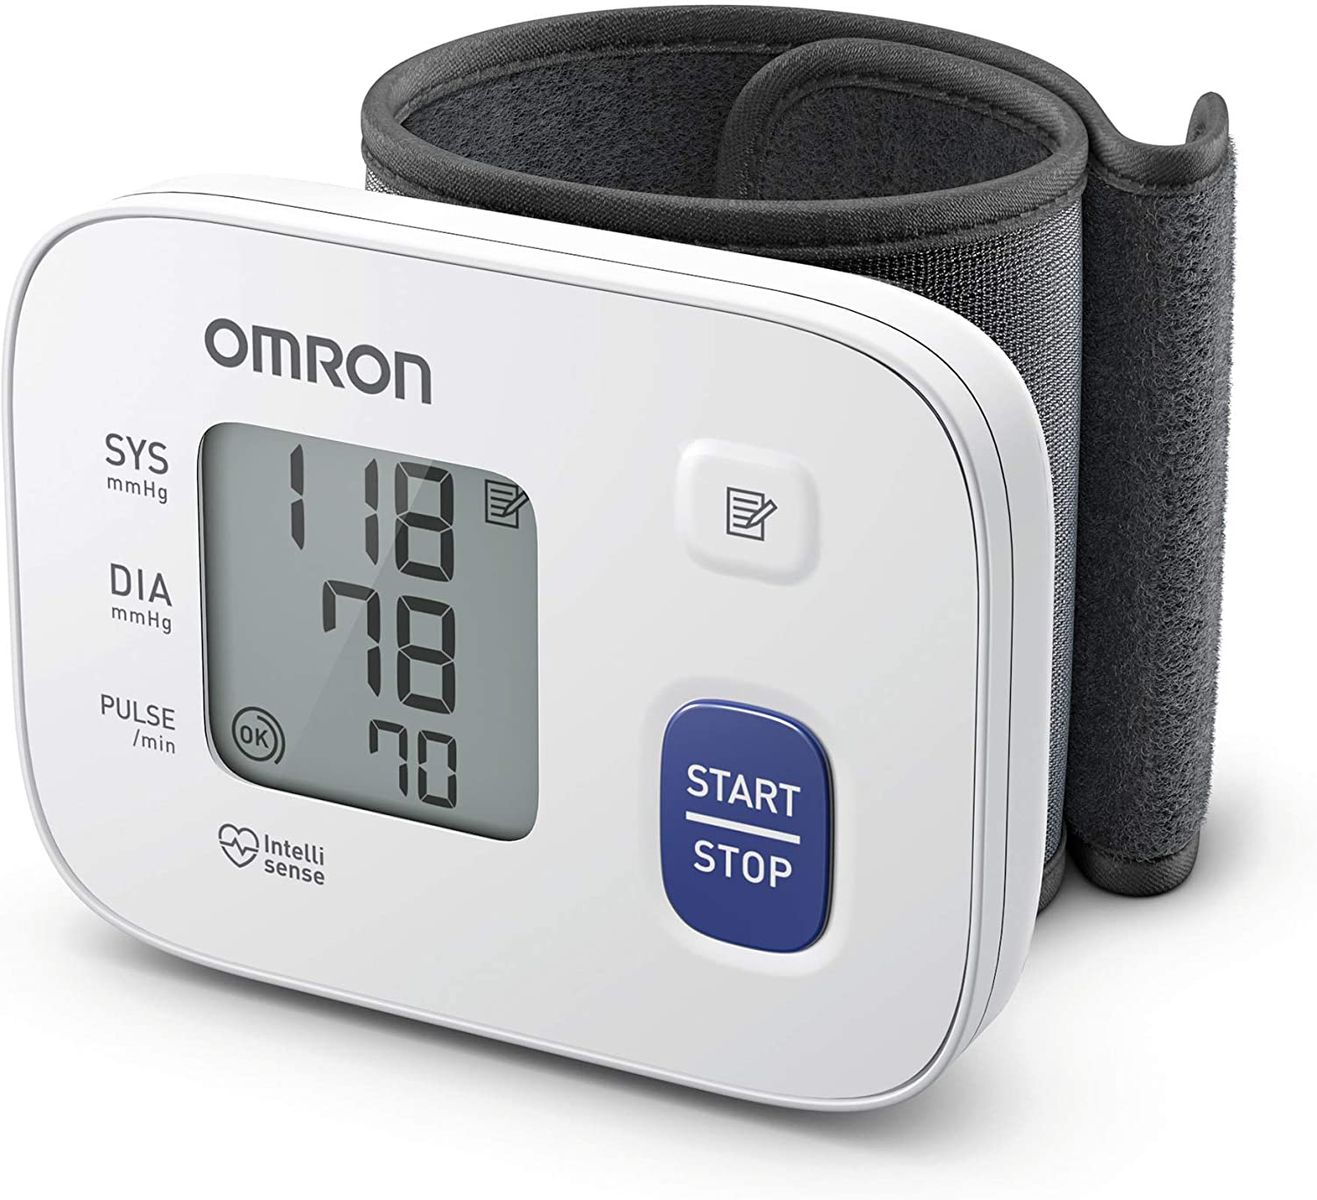 Omron RS1 Wrist Blood Pressure Monitor - Portable Blood Pressure Monitoring Meter